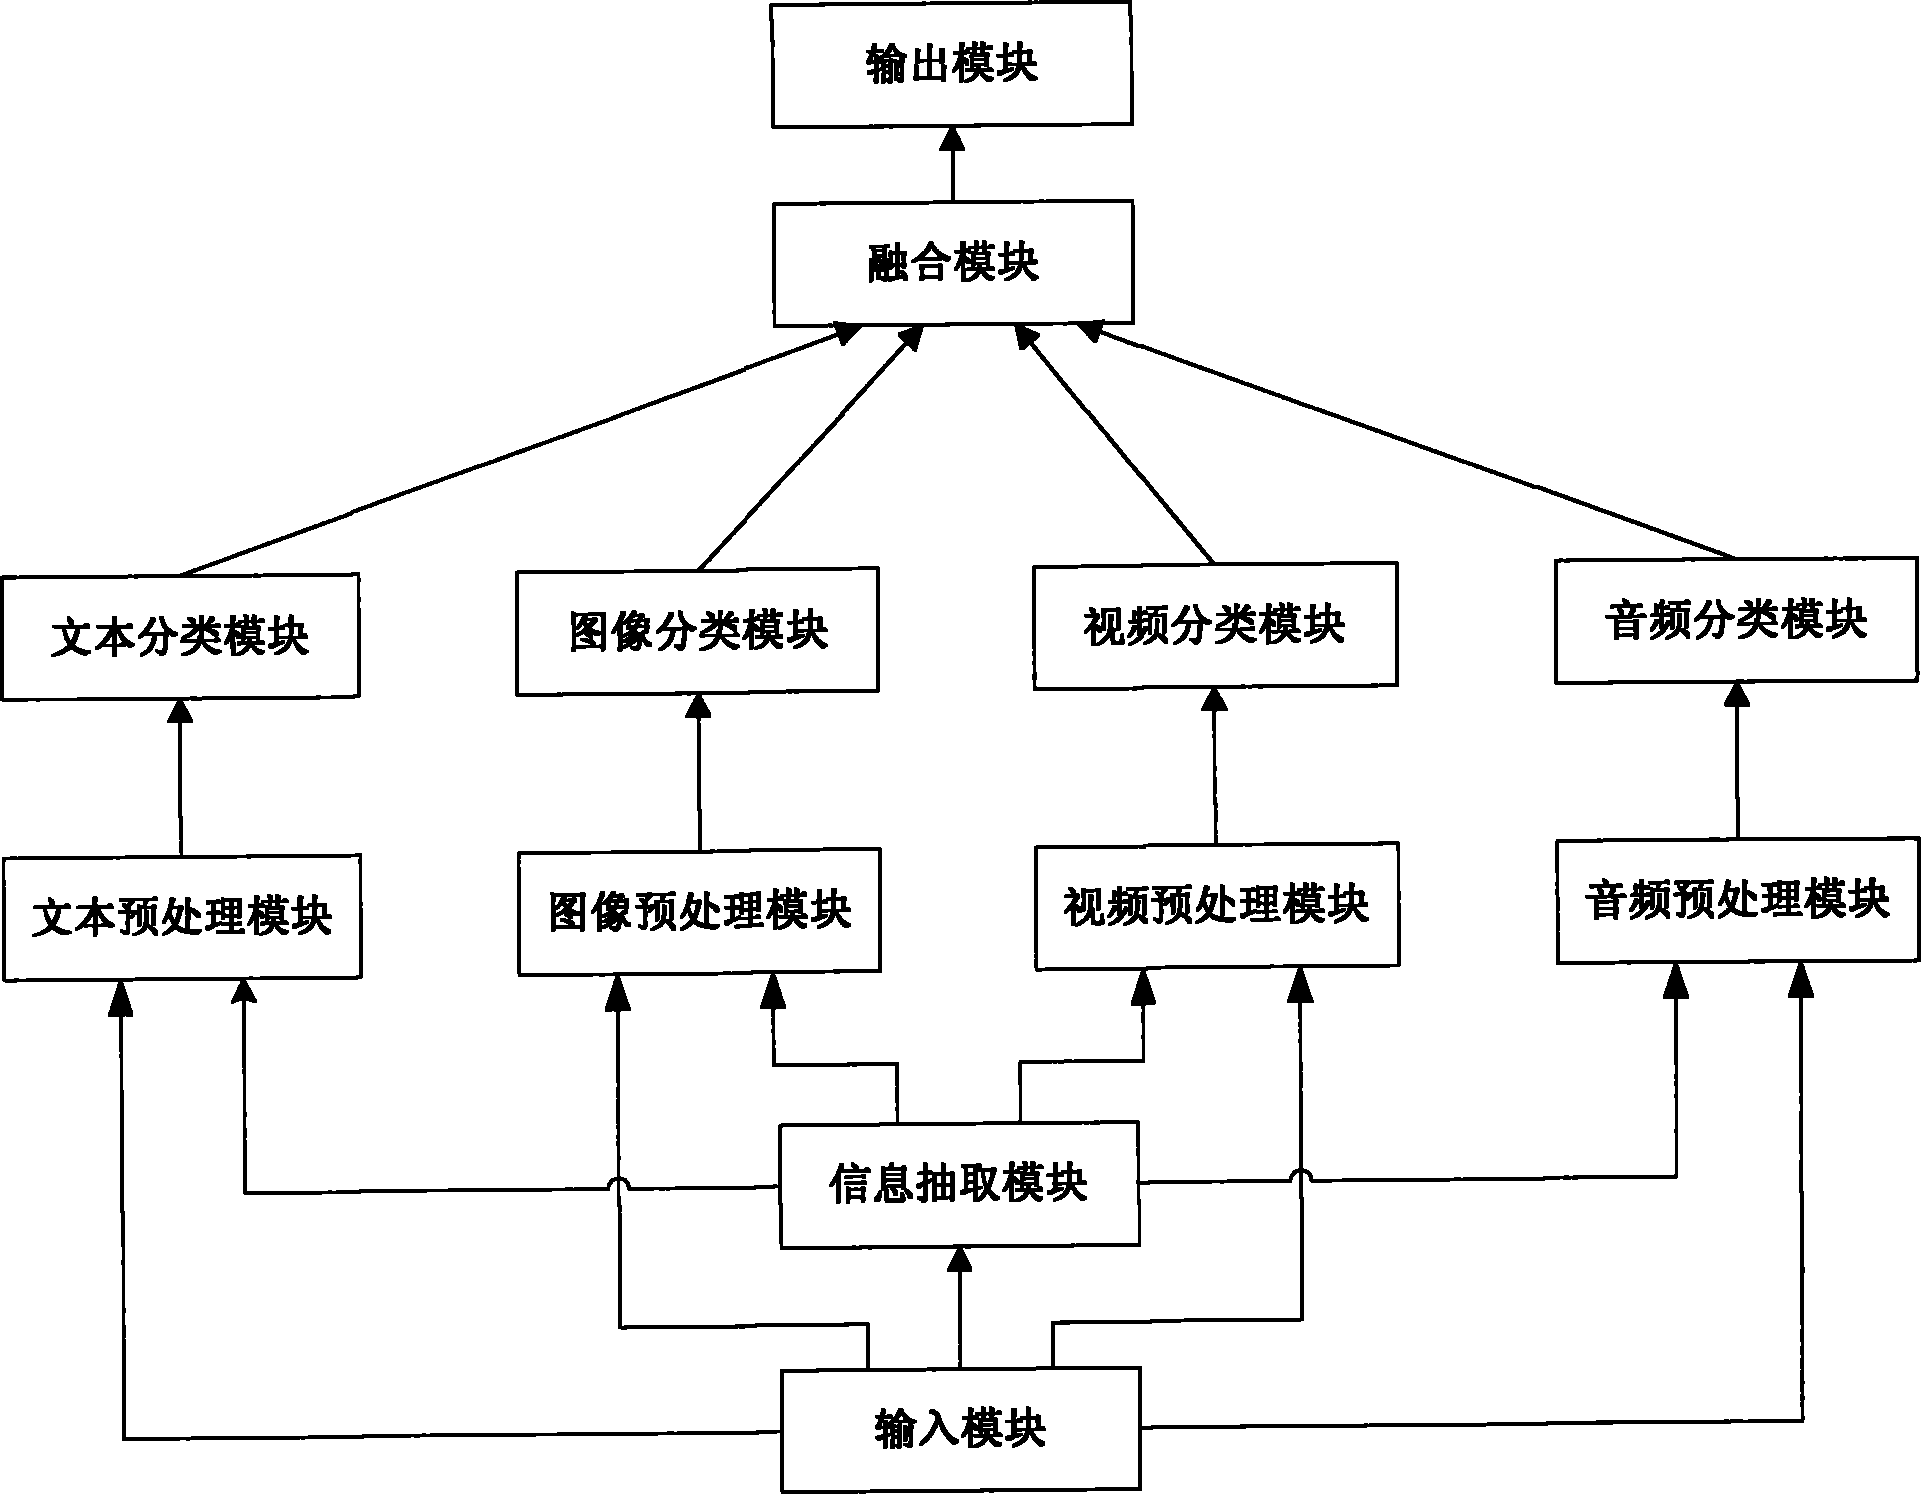 Automatic file classification system